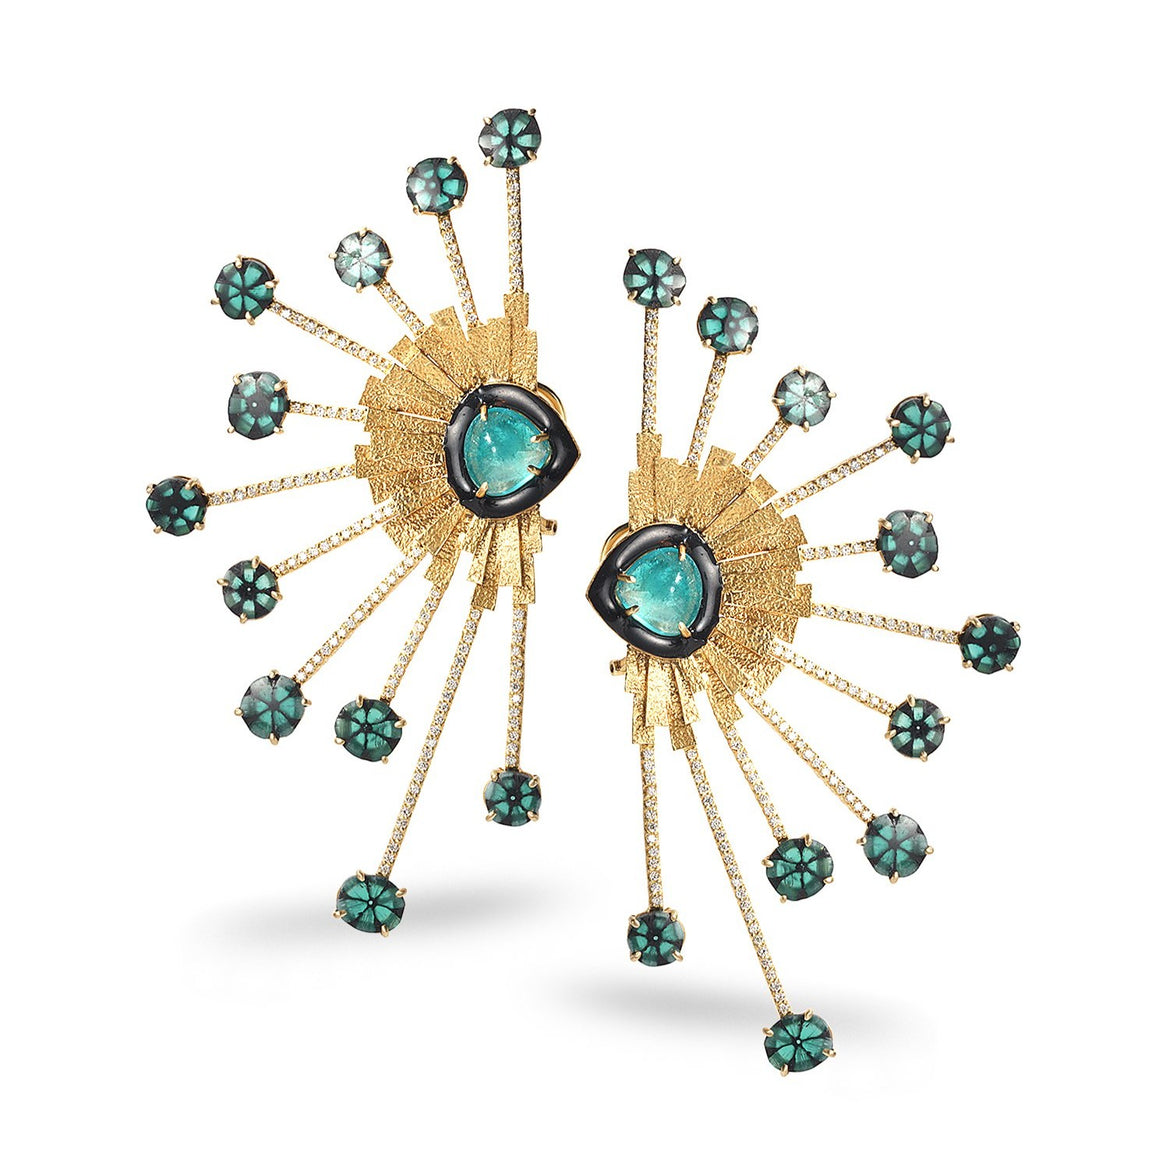 A lucky recipient will receive $69,000 Colombian Emerald Earrings in their lavish gift package